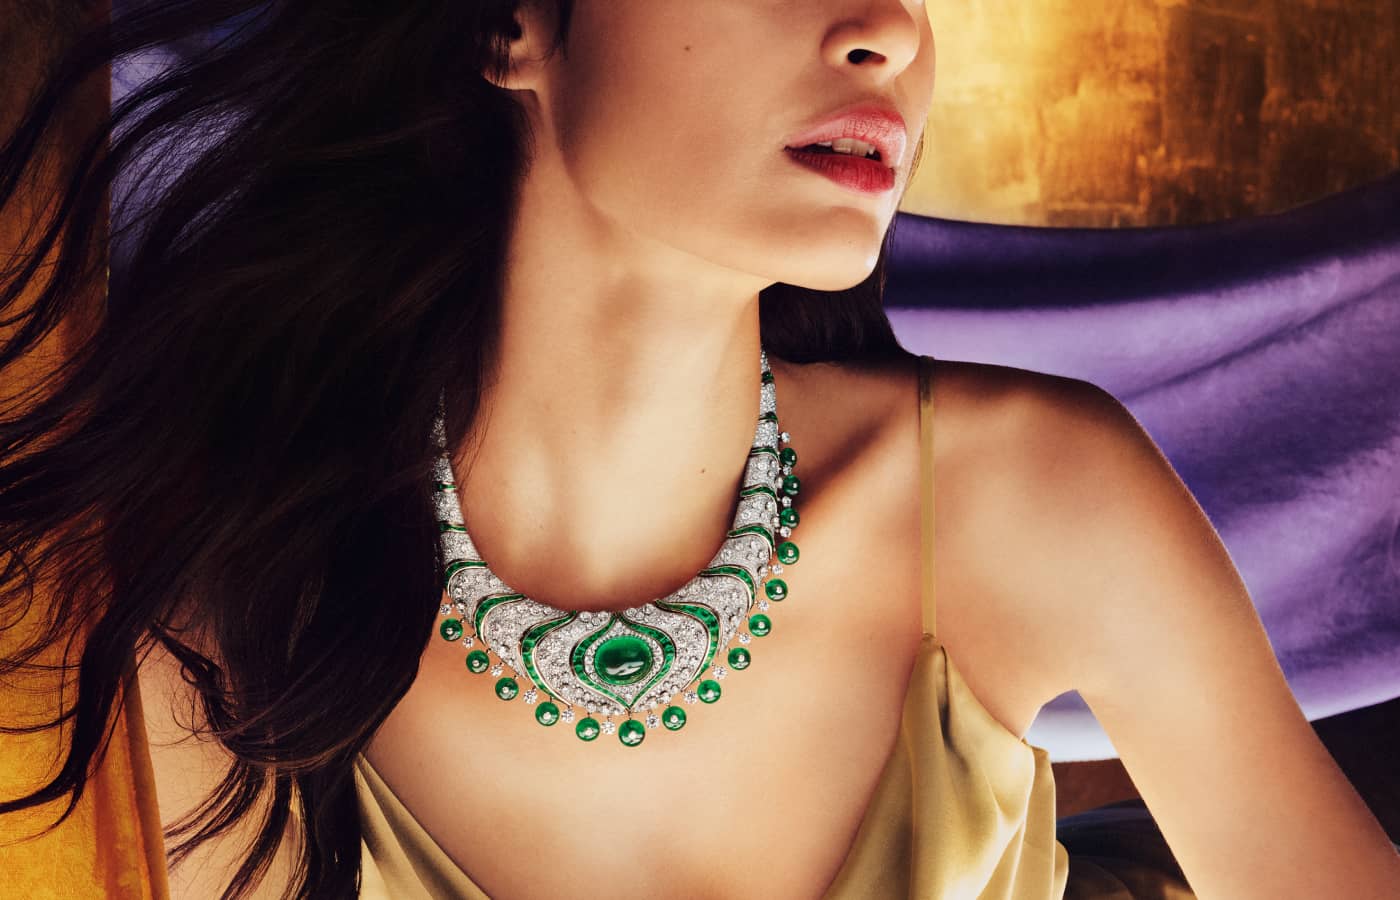 Bulgari on X: The Ocean Wave High Jewelry necklace features an